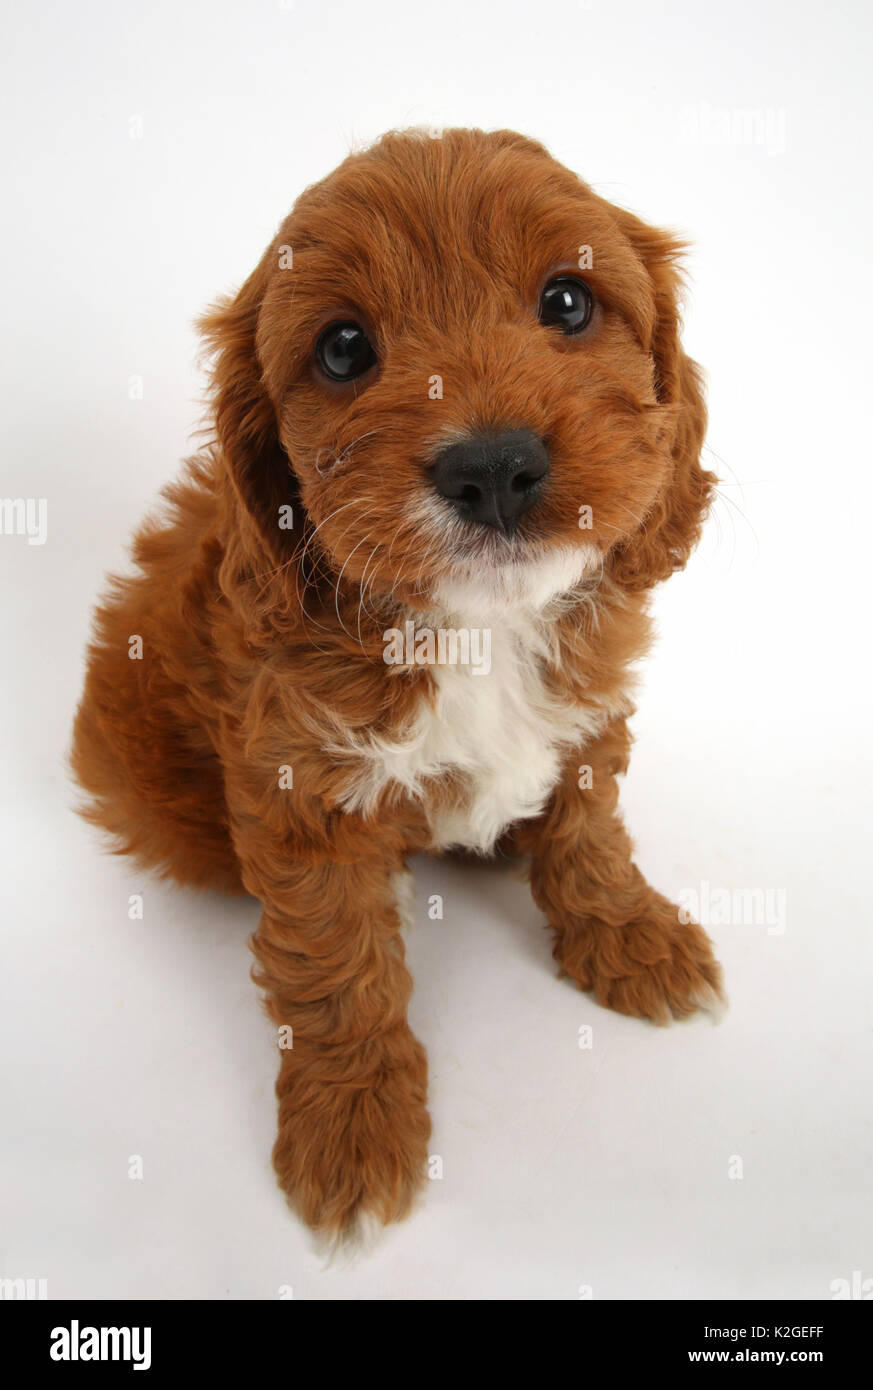 Cavapoo puppy, Cavalier King Charles Spaniel x Poodle, age 6 weeks, sitting  and looking up Stock Photo - Alamy